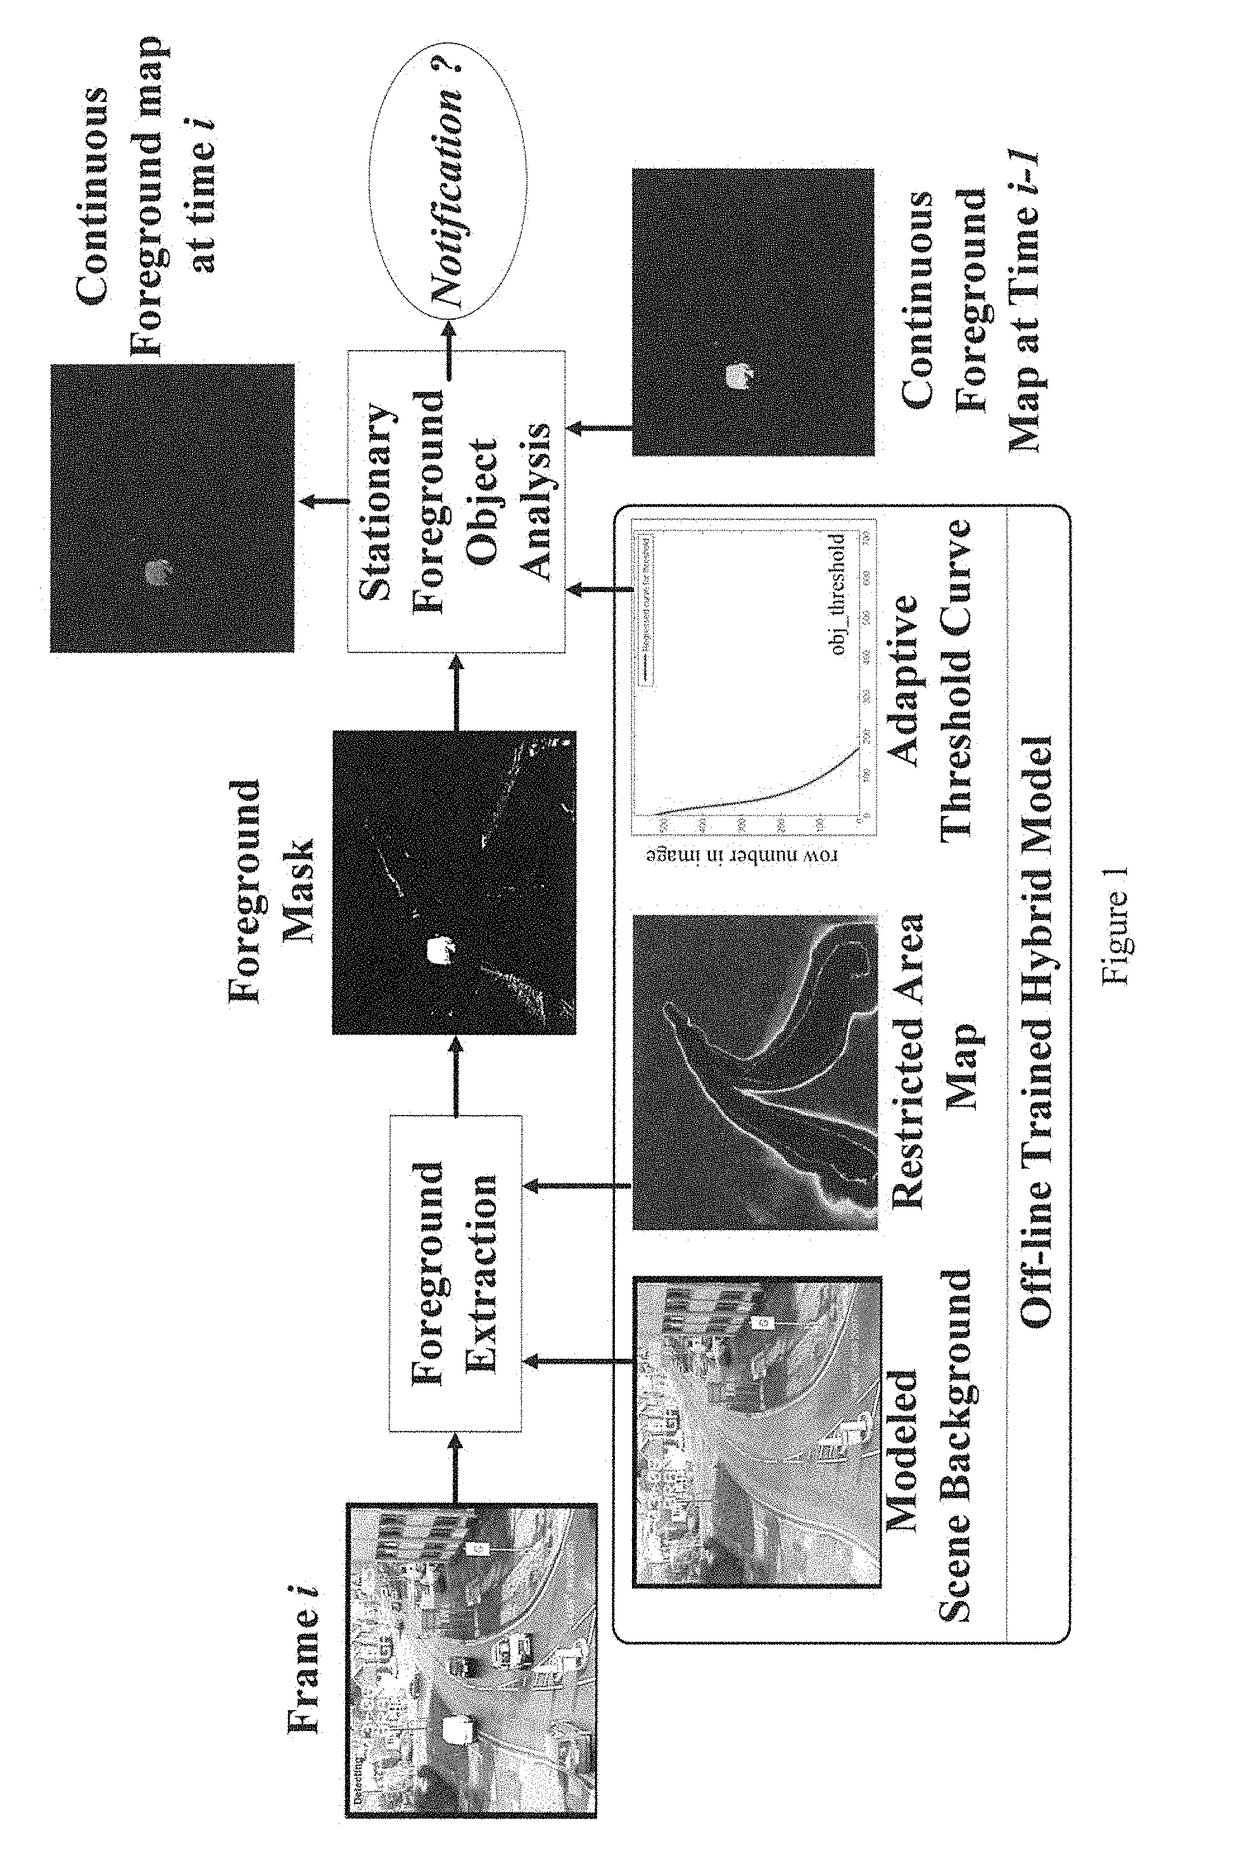 Real-time detection system for parked vehicles